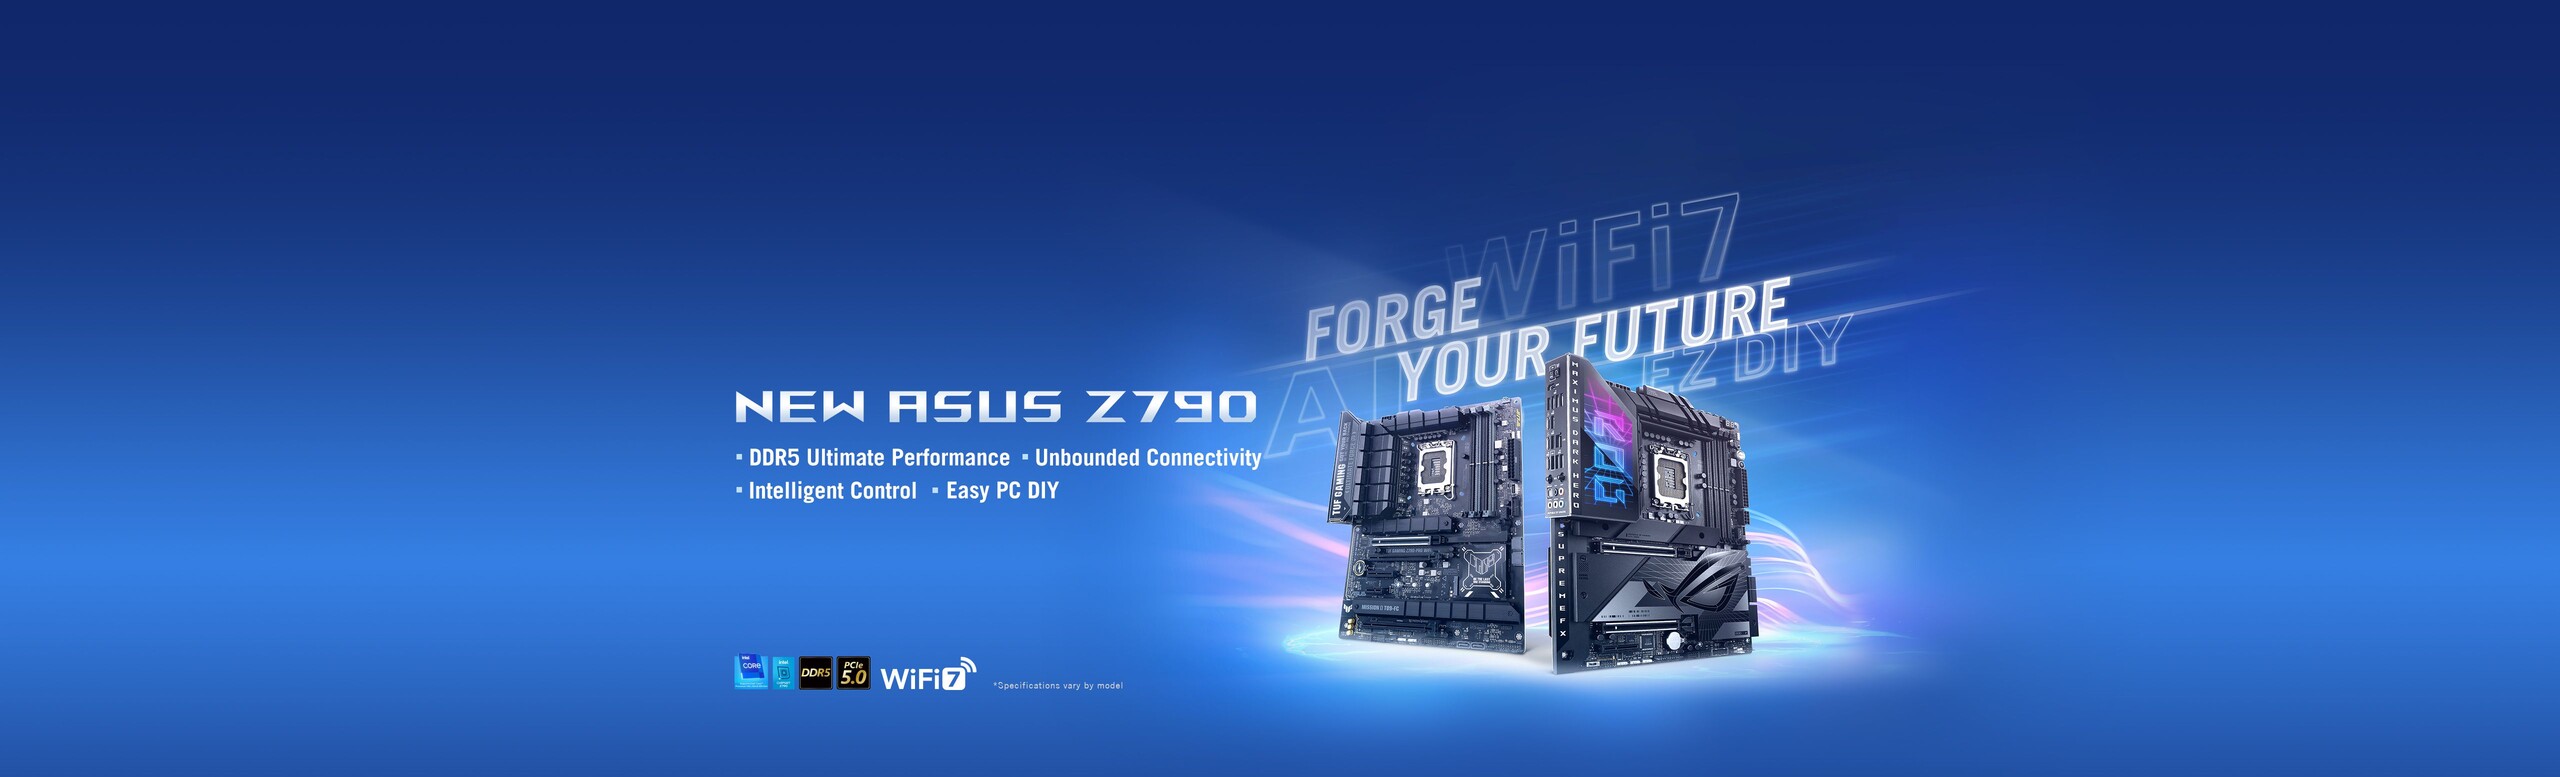 New ASUS Z790 WiFi 7 DDR5 Ultimate Performance Image of 2 Motherboards